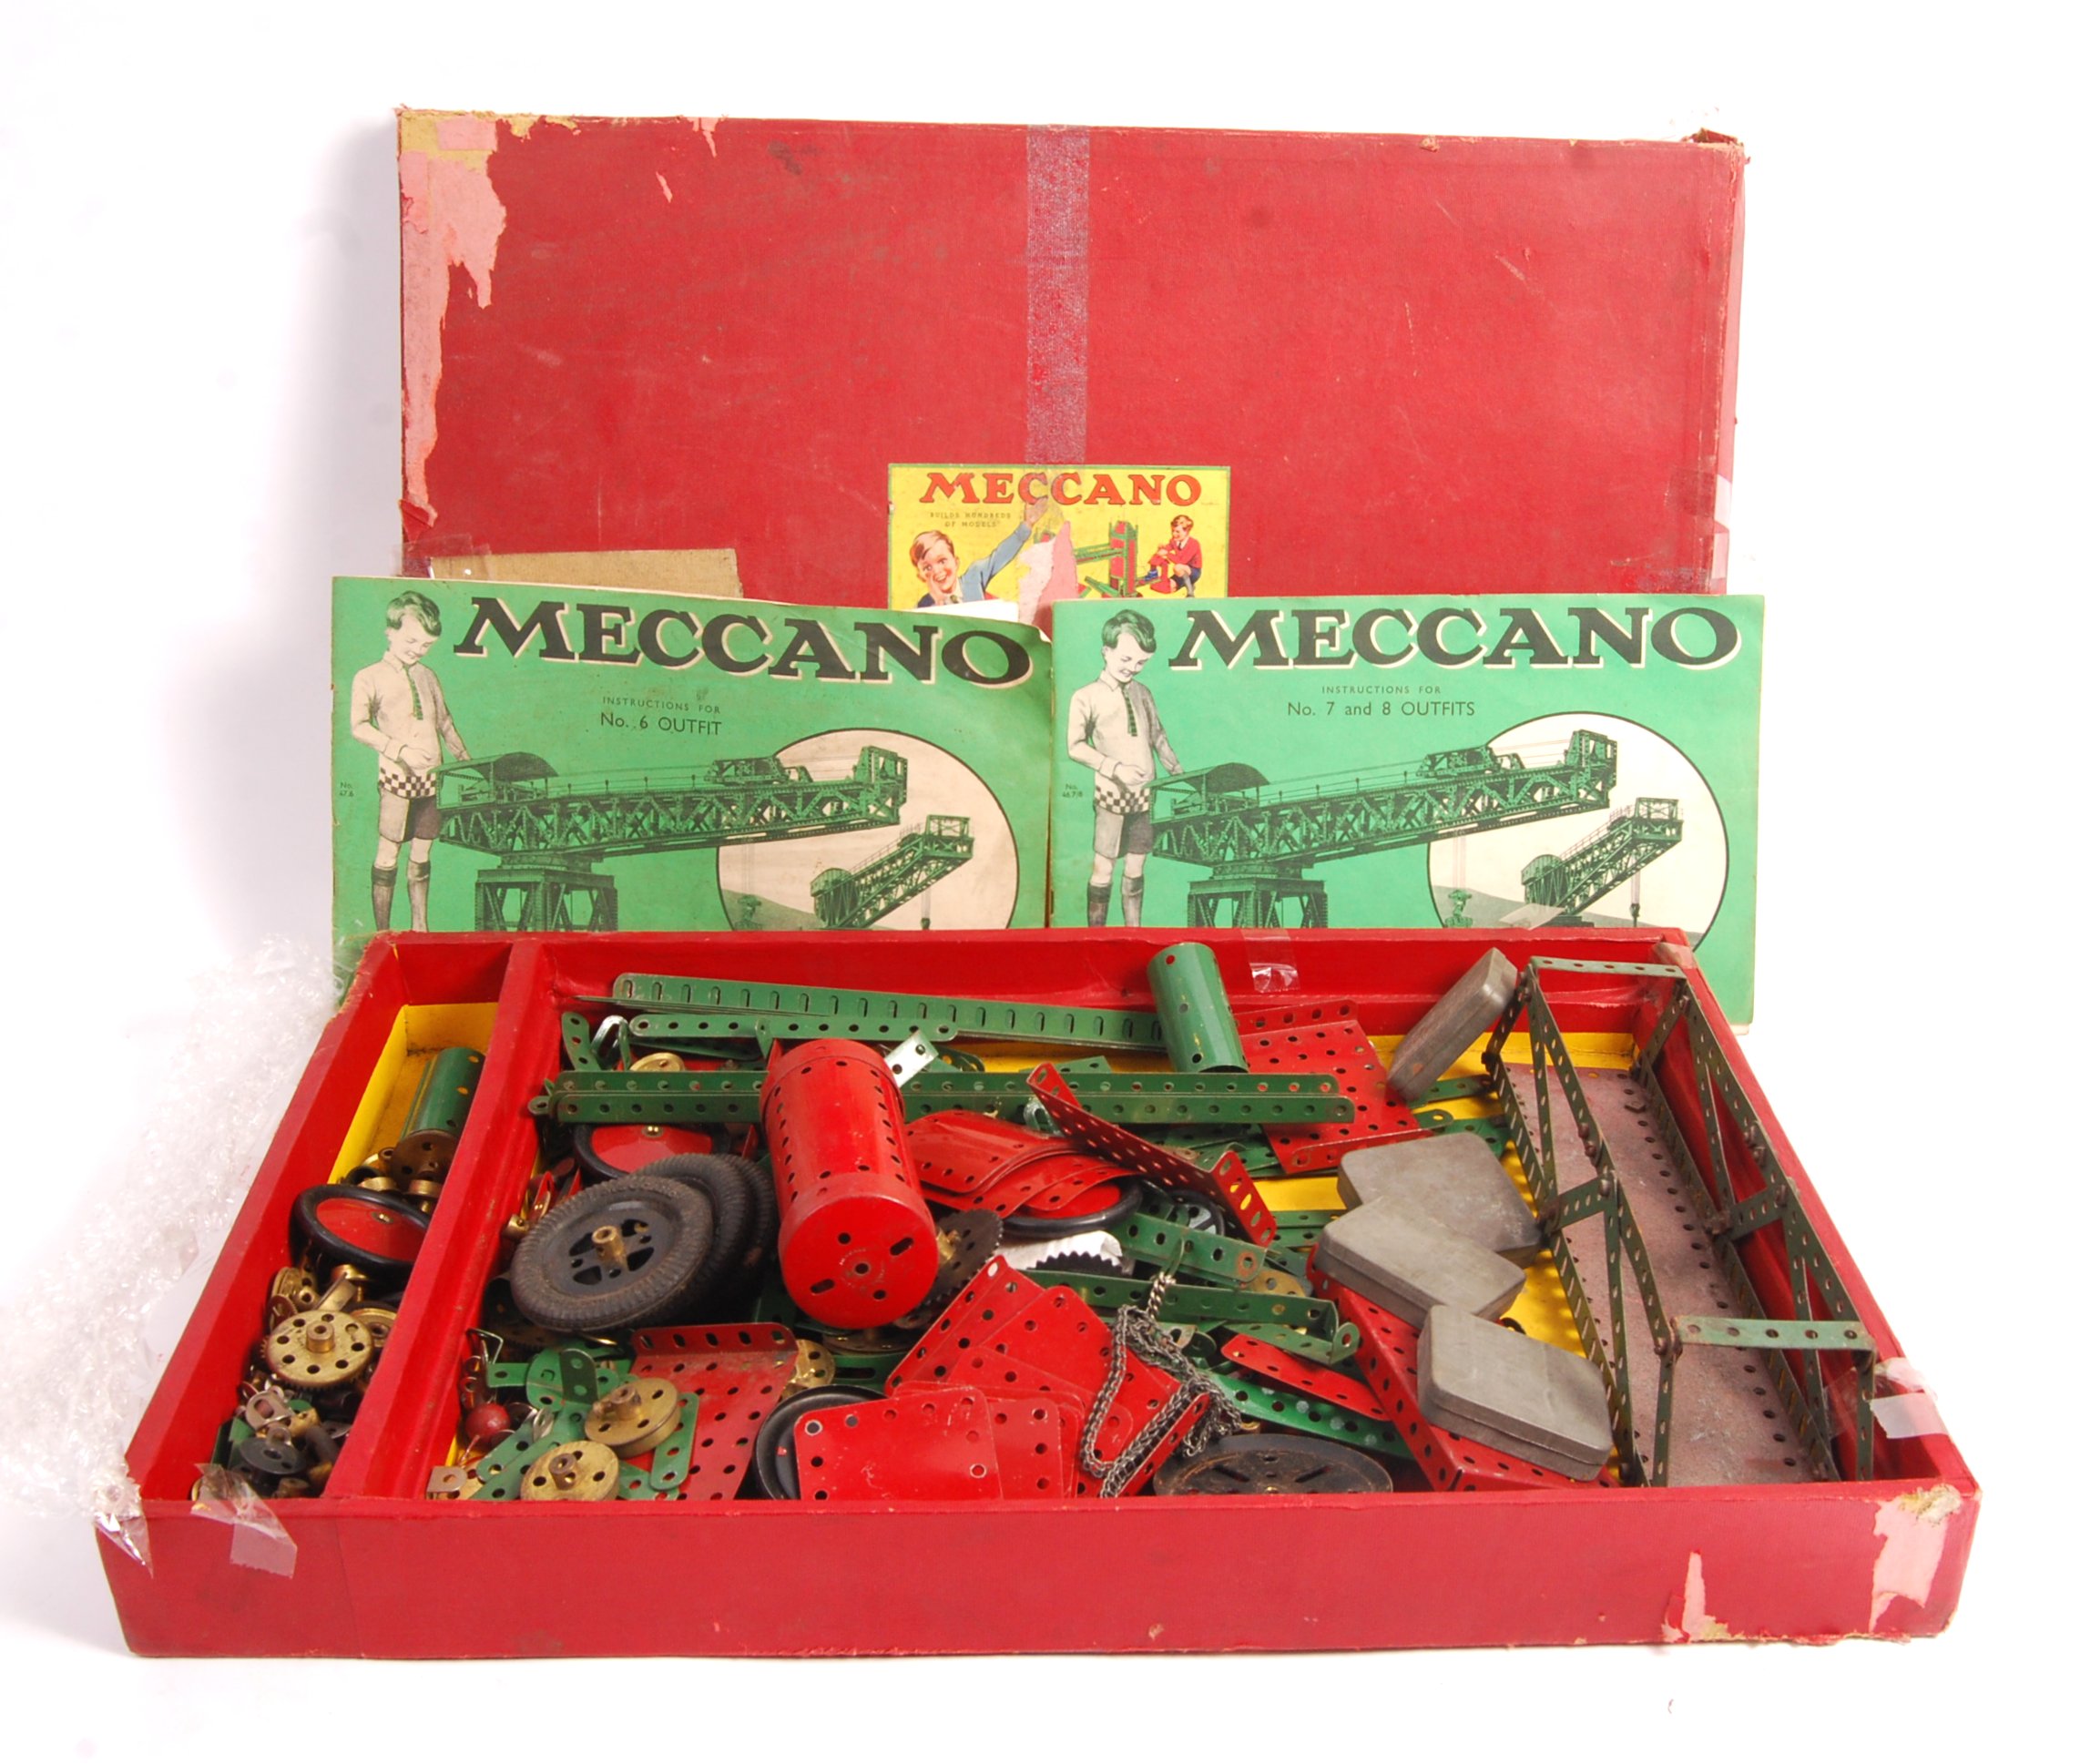 ORIGINAL MECCANO SET OUTFIT 8 WITHIN BOX